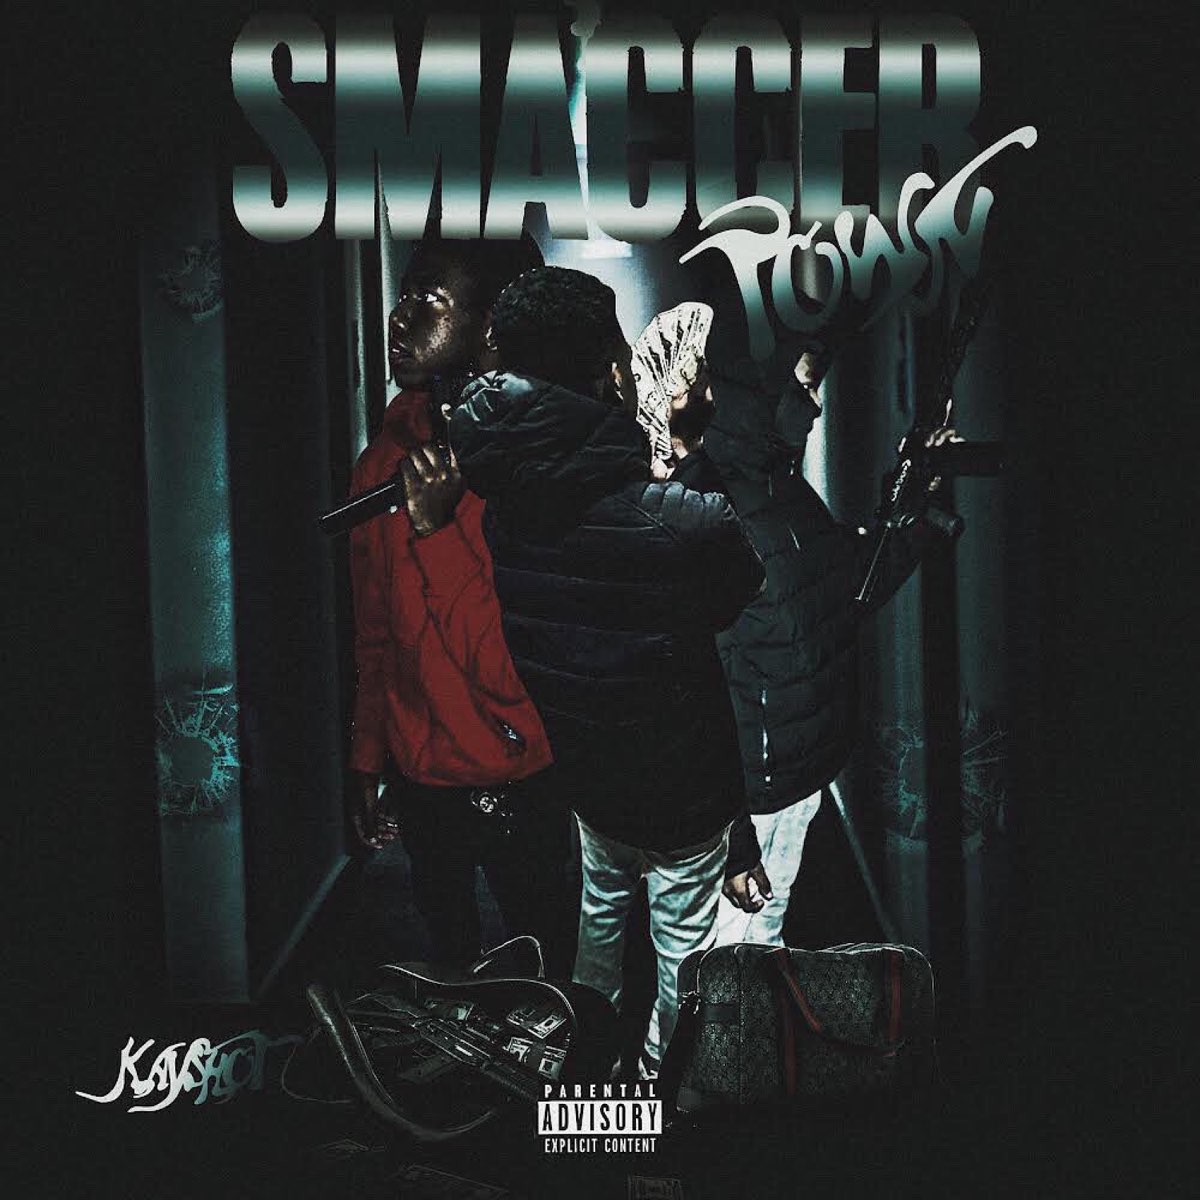 ‎Smaccer Town - Album by Kayshot - Apple Music